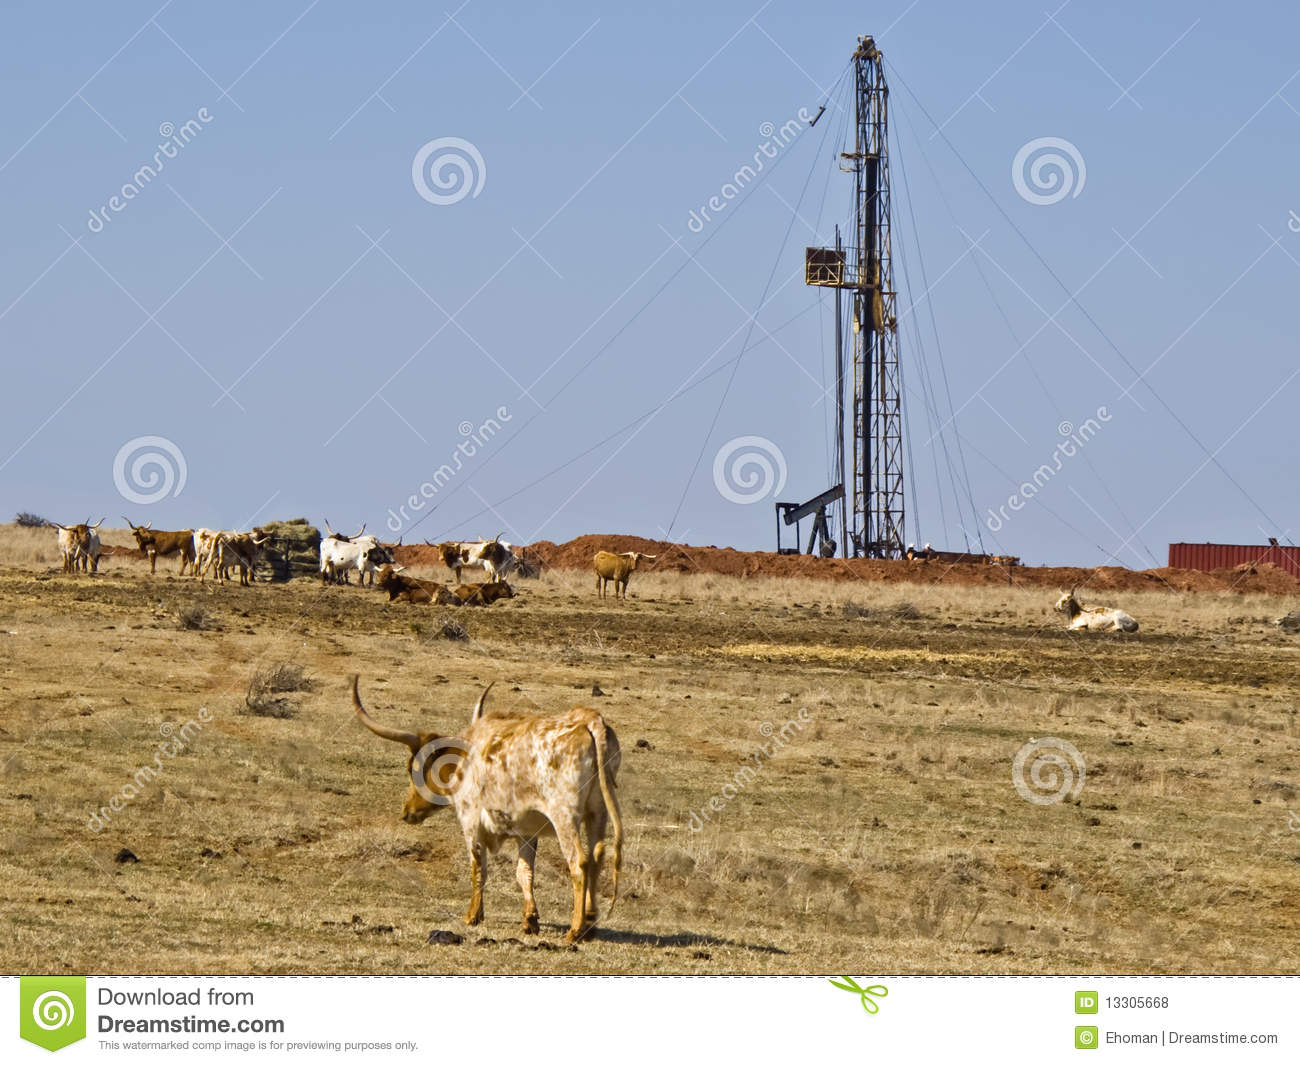 Work Over Rig And Longhorn Cattle Royalty Free Stock Photos   Image    